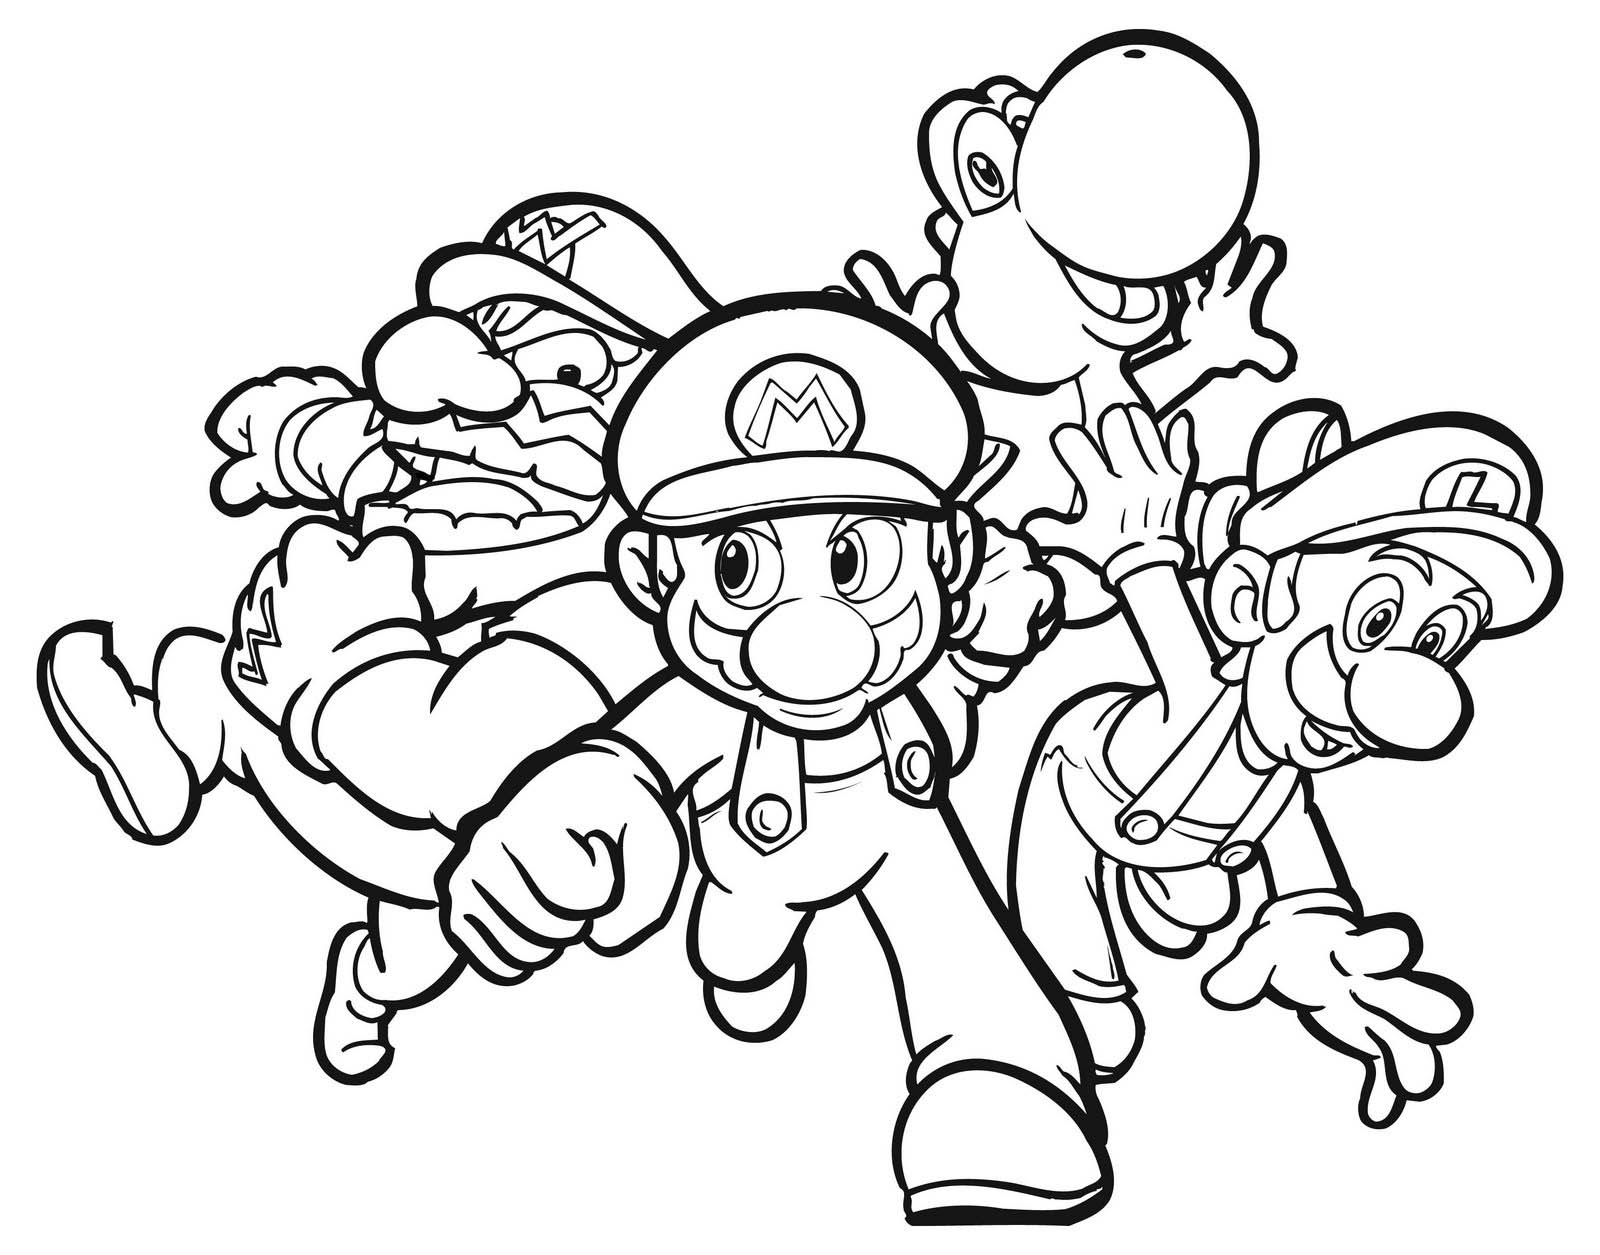 super-mario-coloring-pages-best-coloring-pages-for-kids